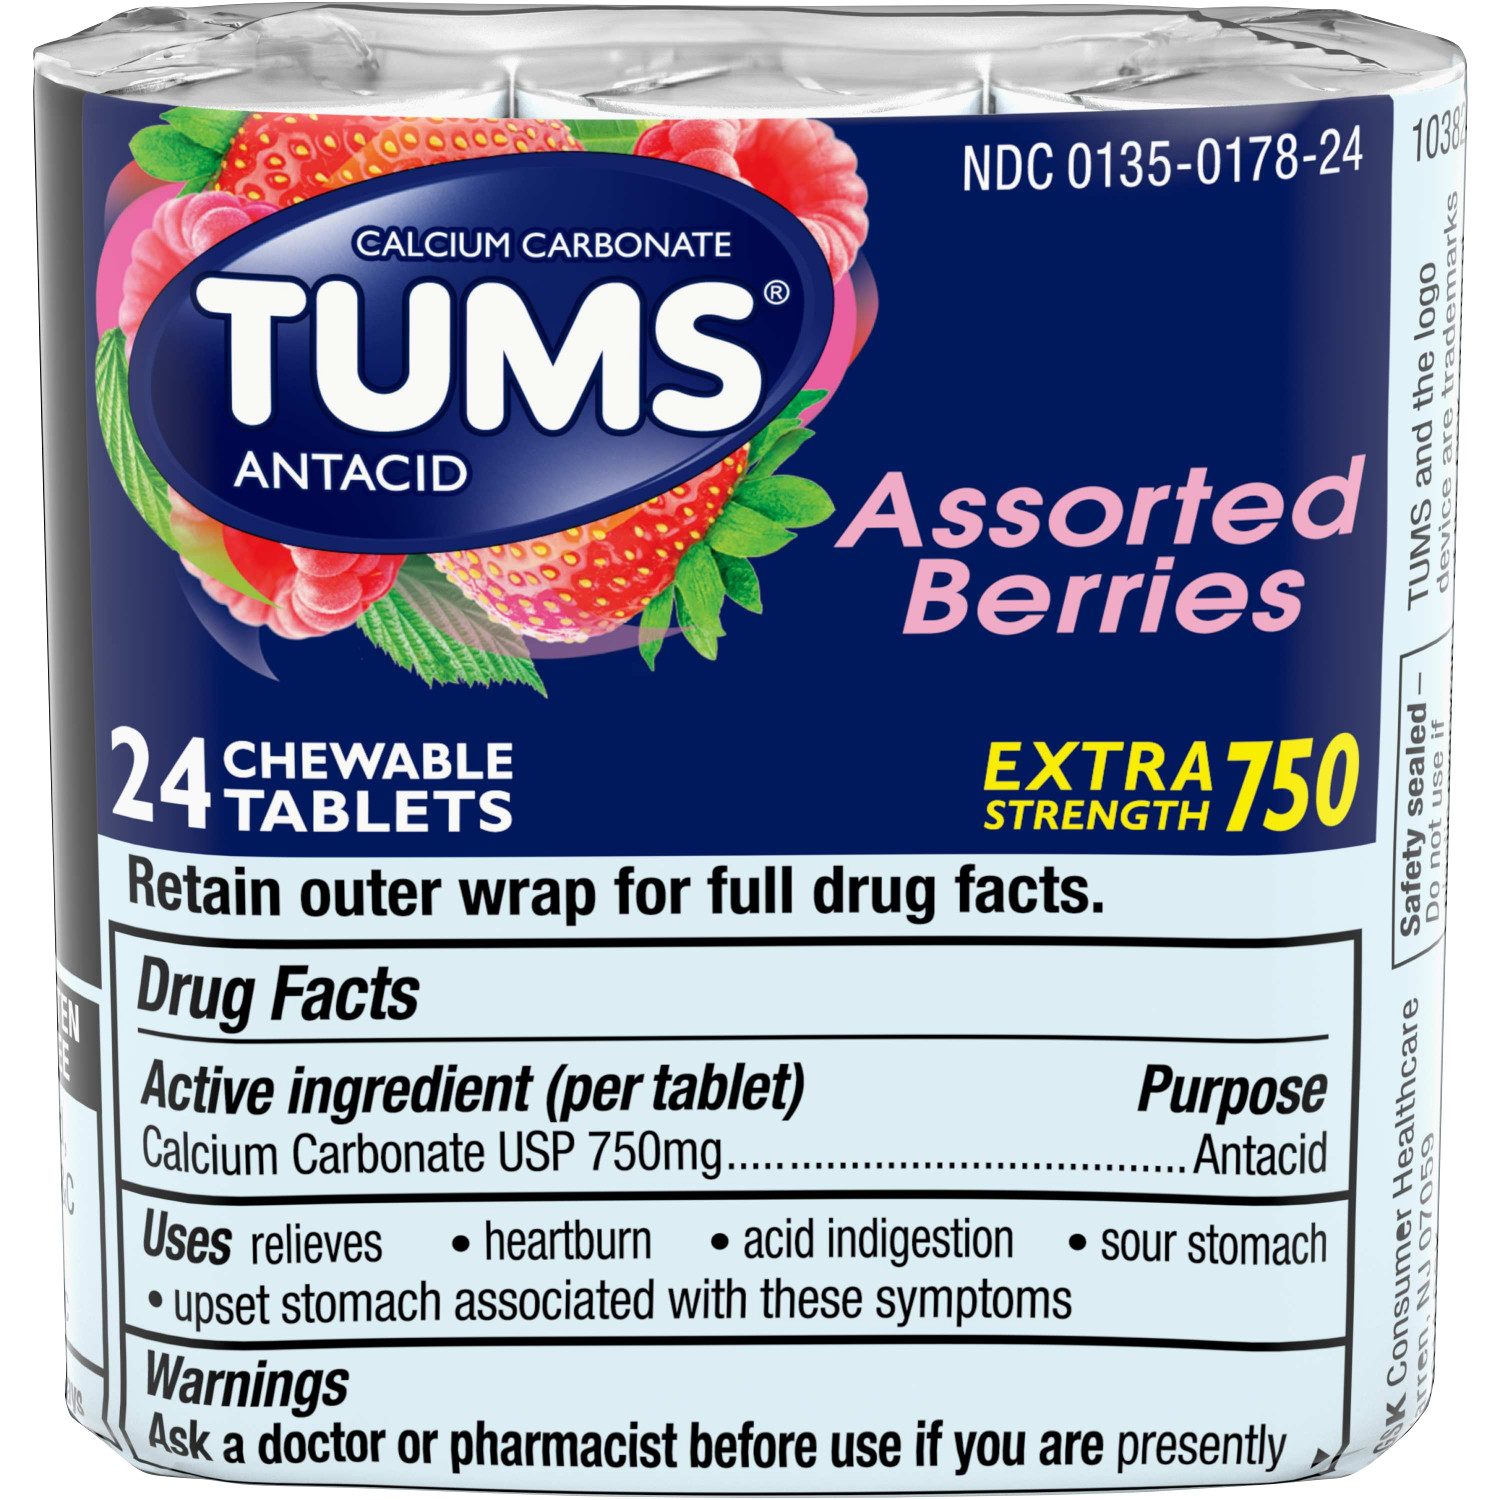 TUMS Antacid Chewable Tablets for Heartburn Relief, Extra Strength, Assorted Berries, 3-Rolls of 8 Tablets - image 1 of 12